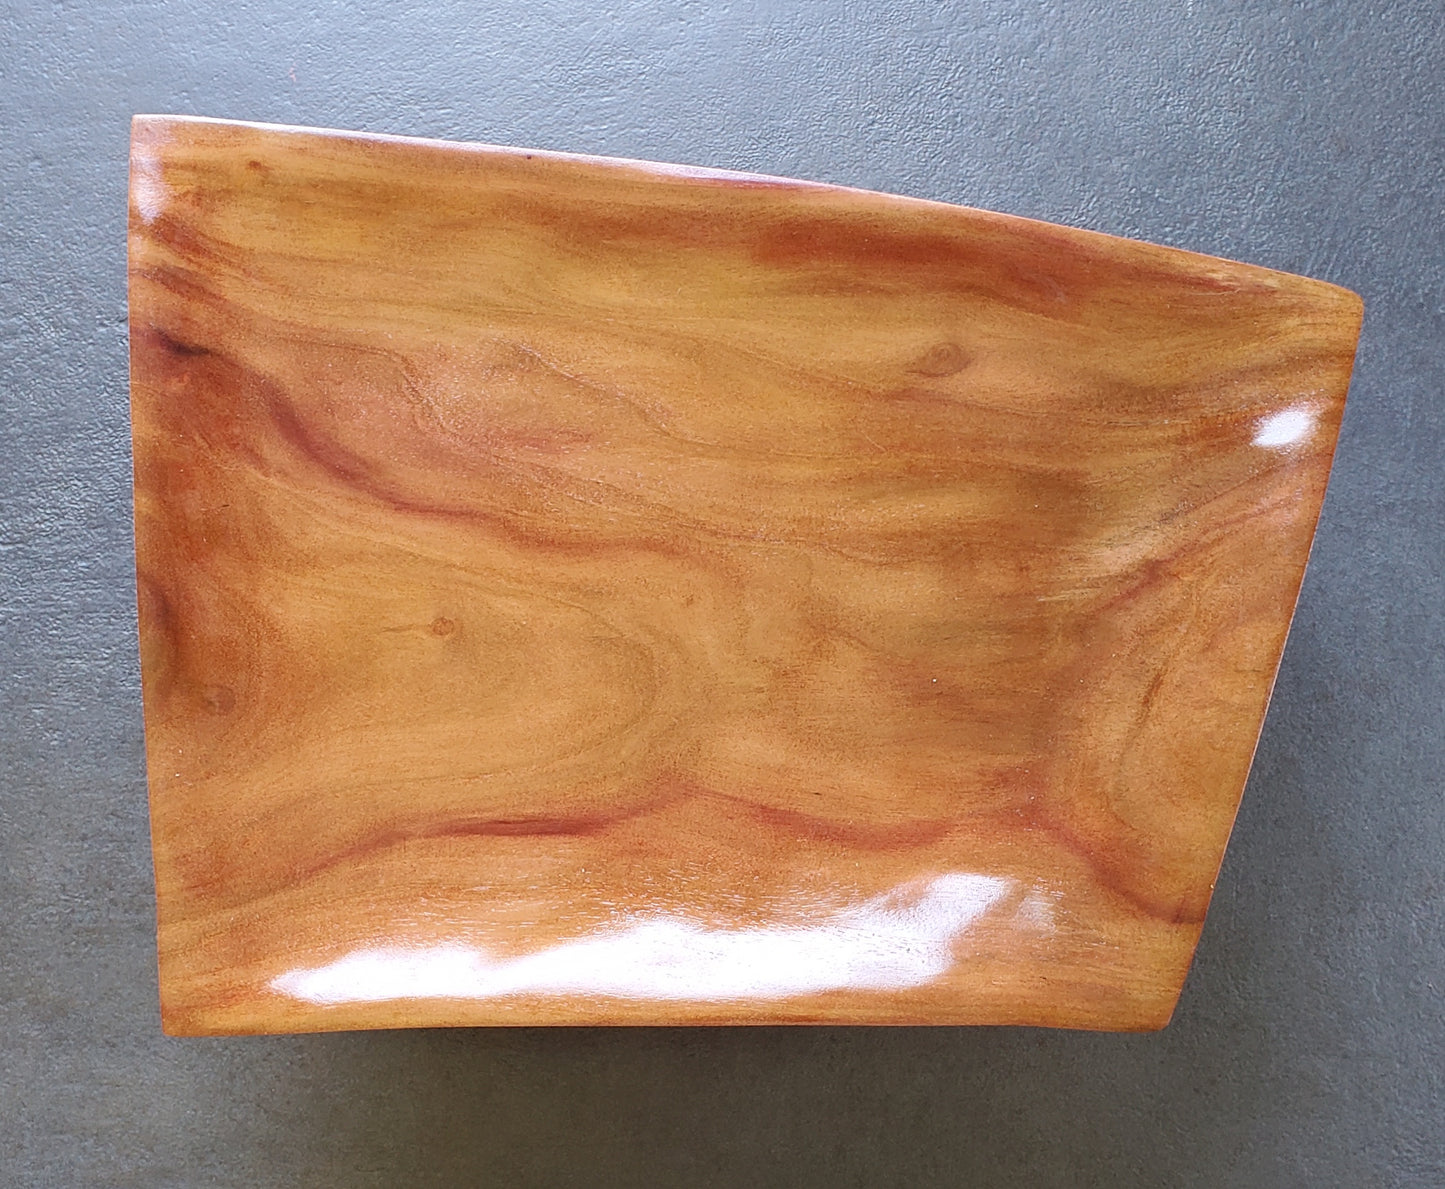 Hand Carved Serving Platter Geometric Shape from Local MIro Wood - Medium